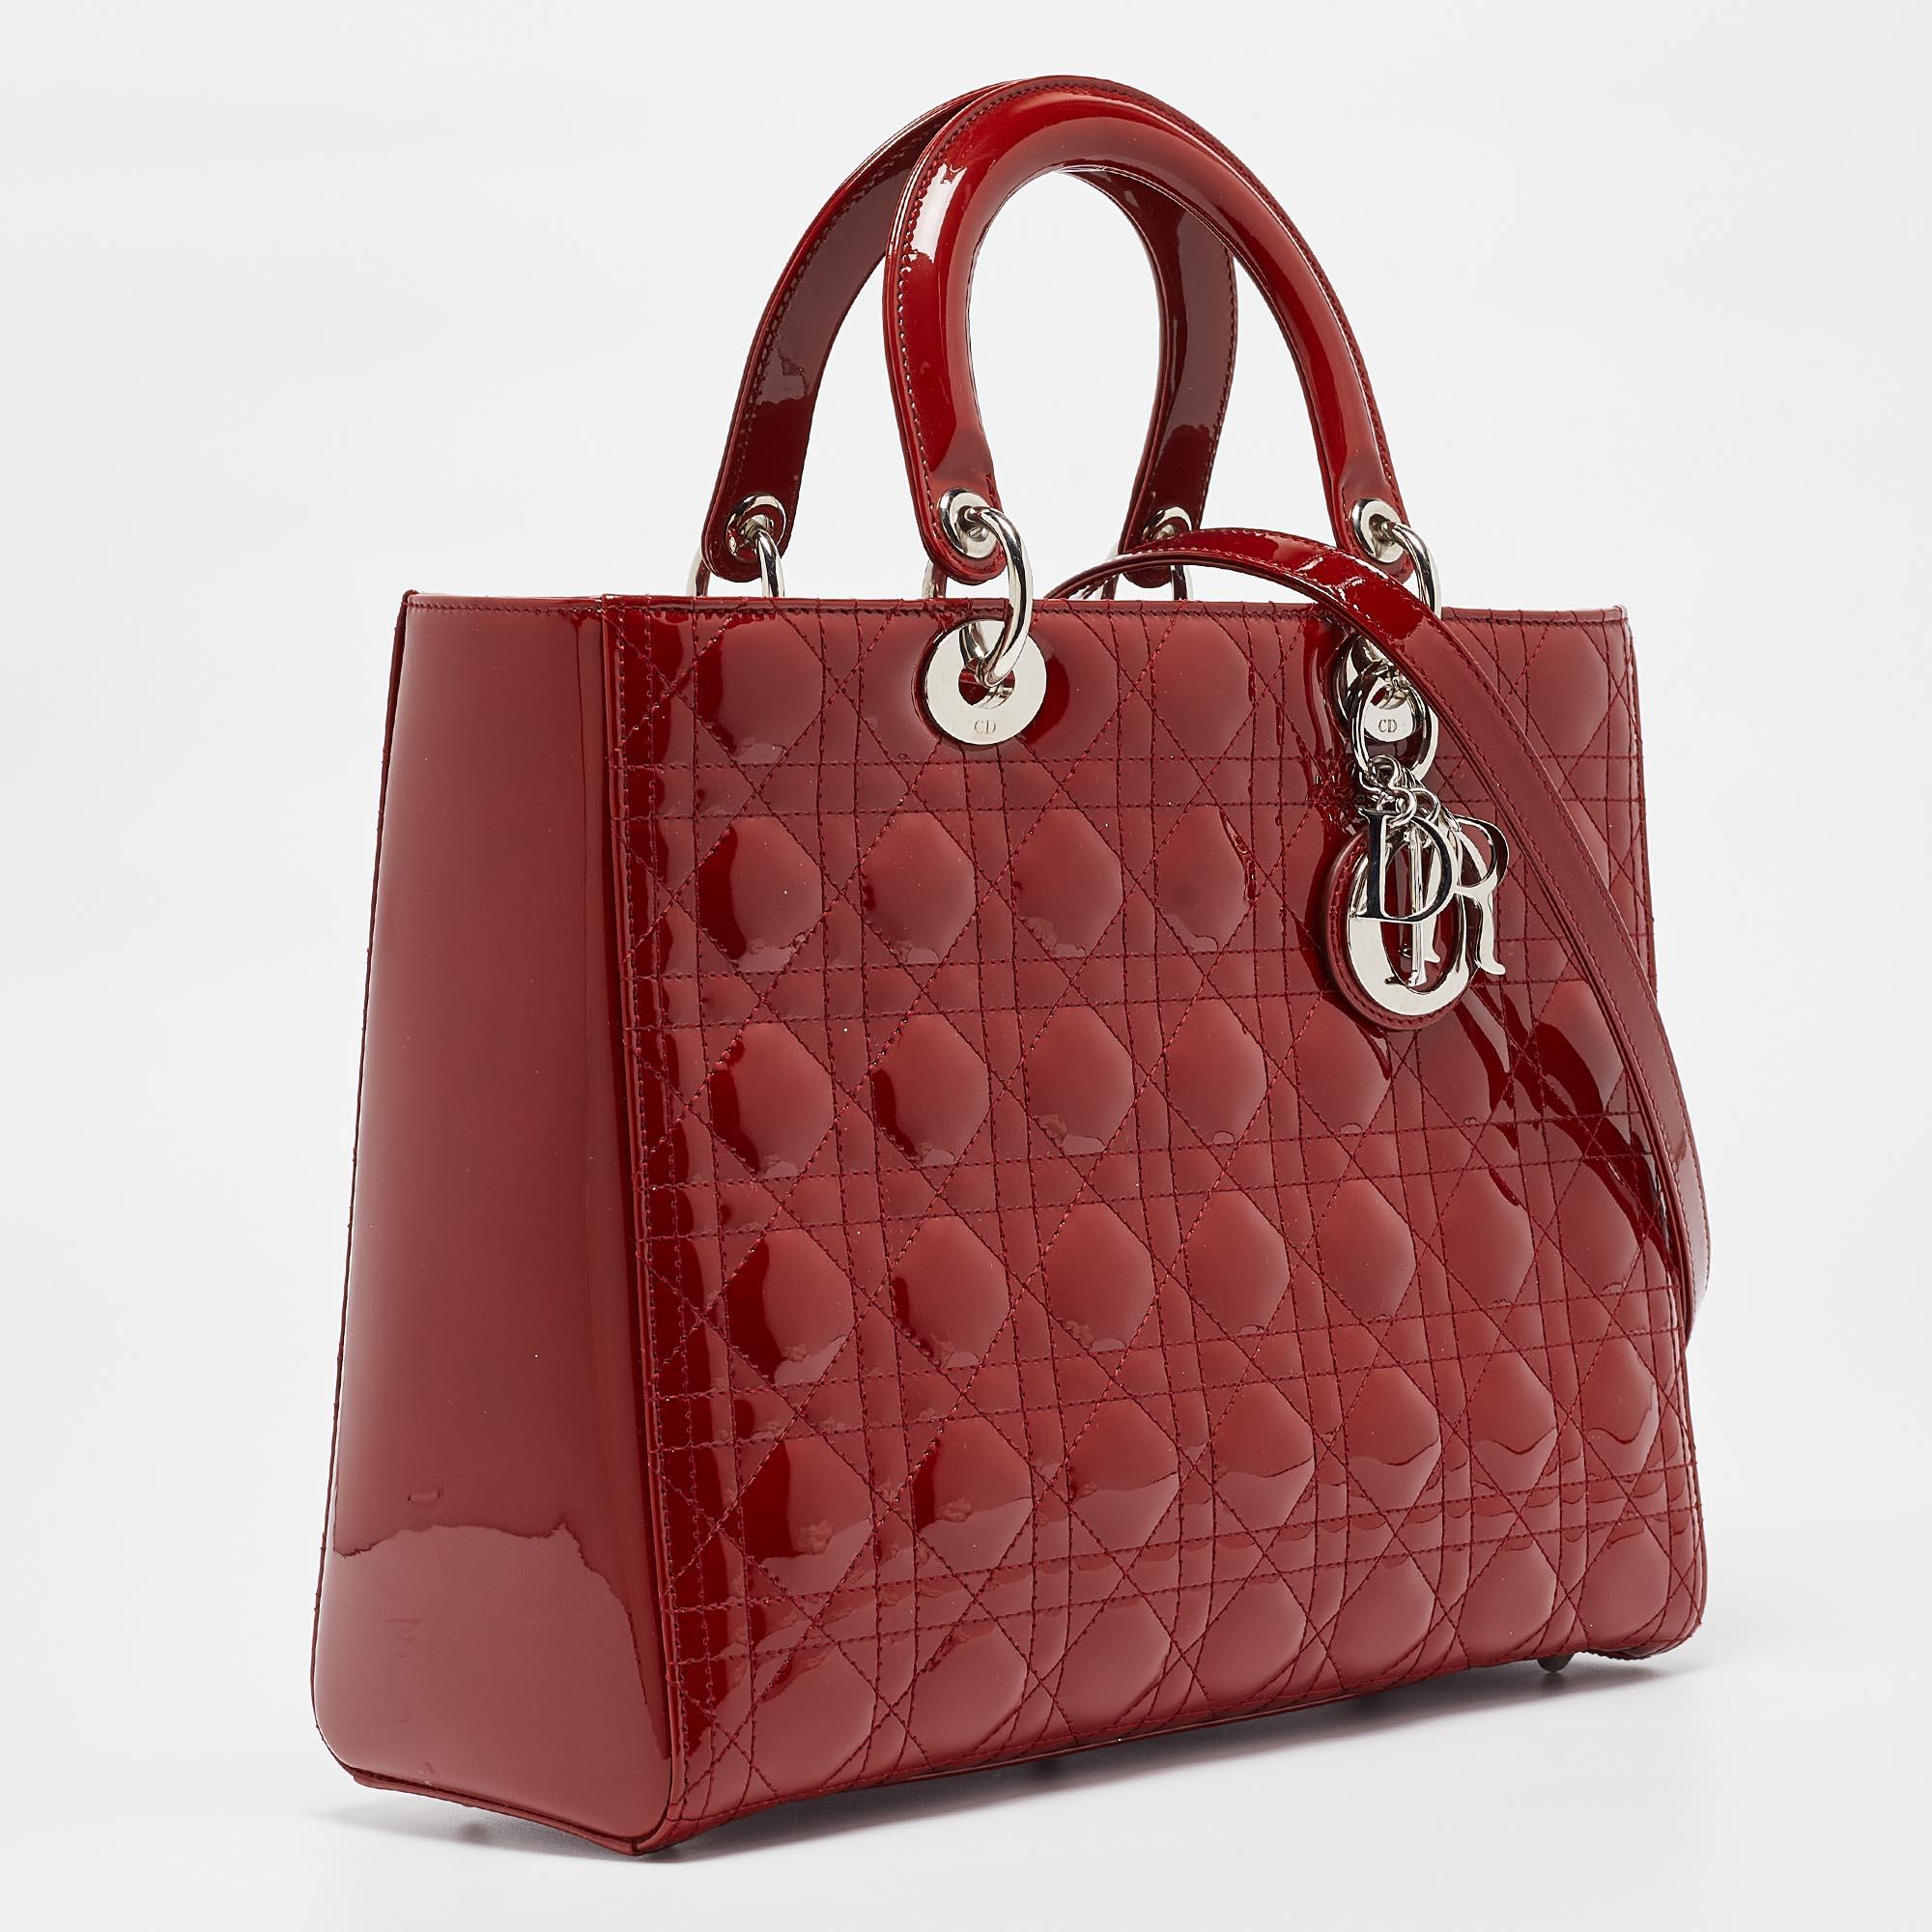 Dior Red Cannage Patent Leather Large Lady Dior Tote In Good Condition For Sale In Dubai, Al Qouz 2